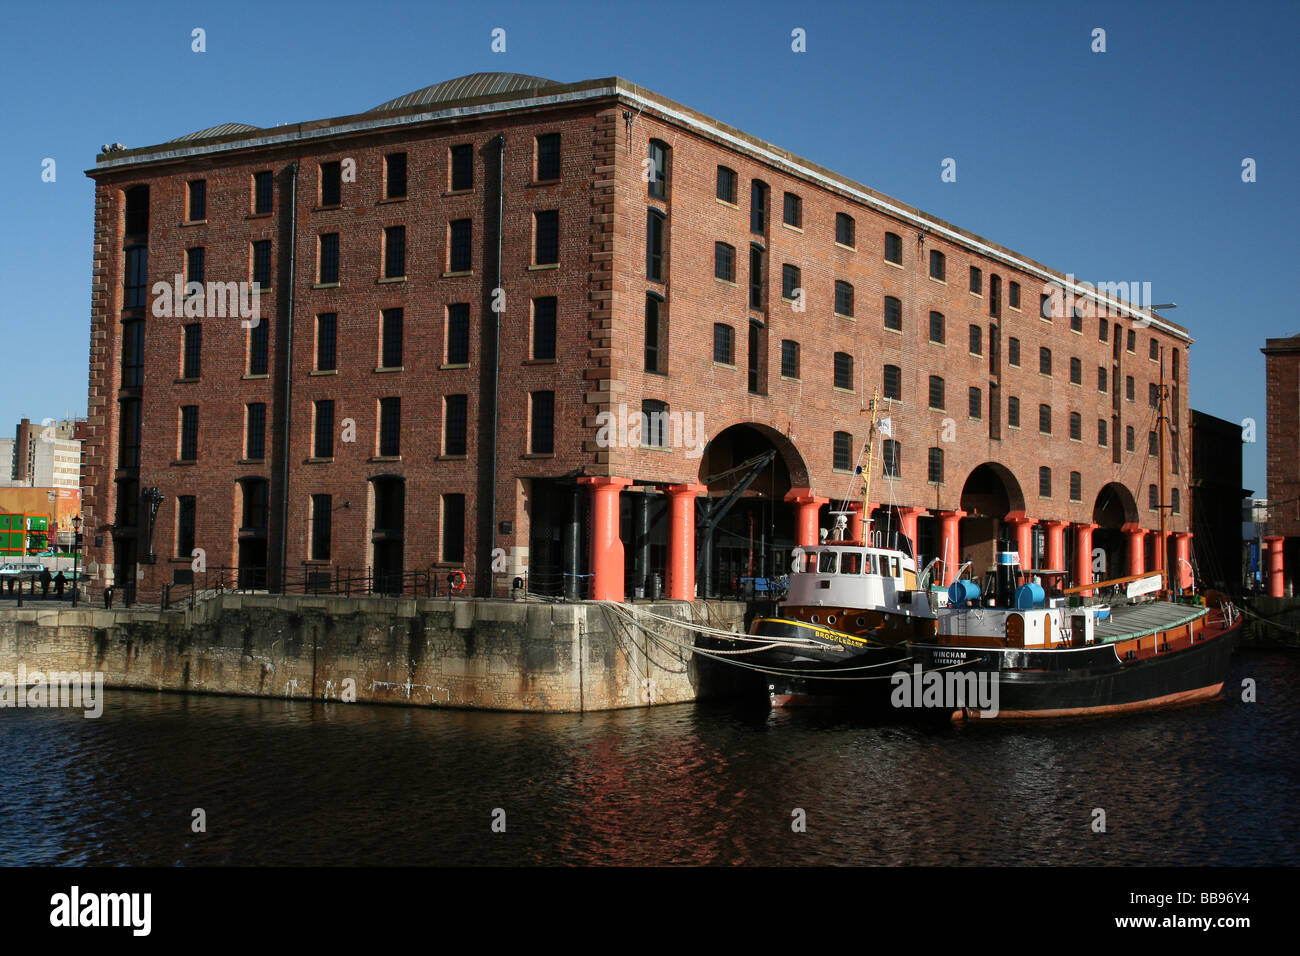 Old Warehouse Buildings And Tug Boats At The Albert Dock, Liverpool, Merseyside, UK Stock Photo